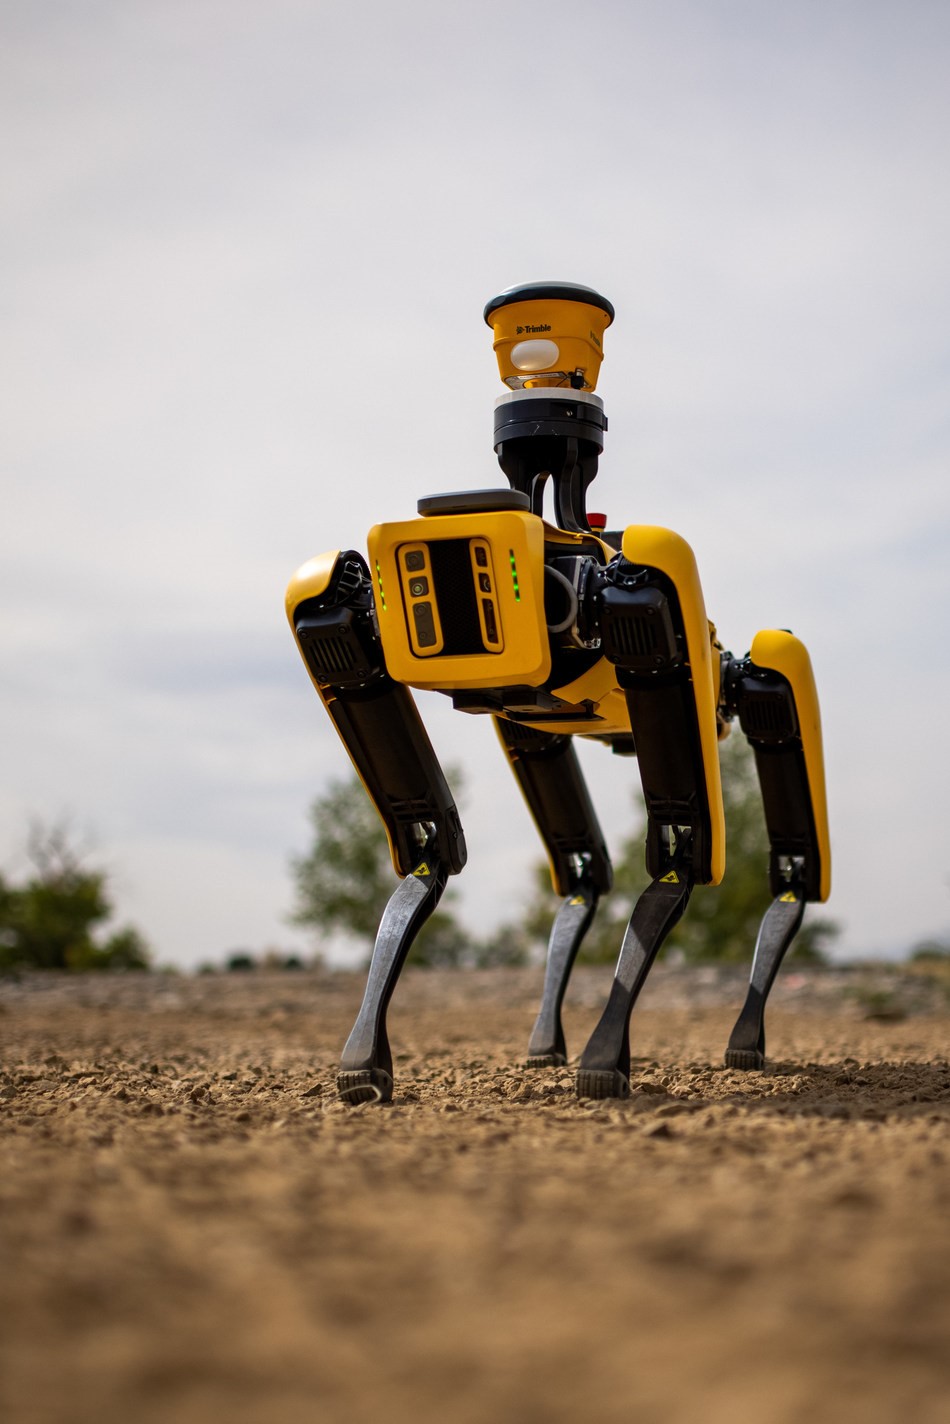 Trimble and Boston Dynamics announce a strategic alliance to extend the use of autonomous robots in construction. Source: Trimble and Boston Dynamics